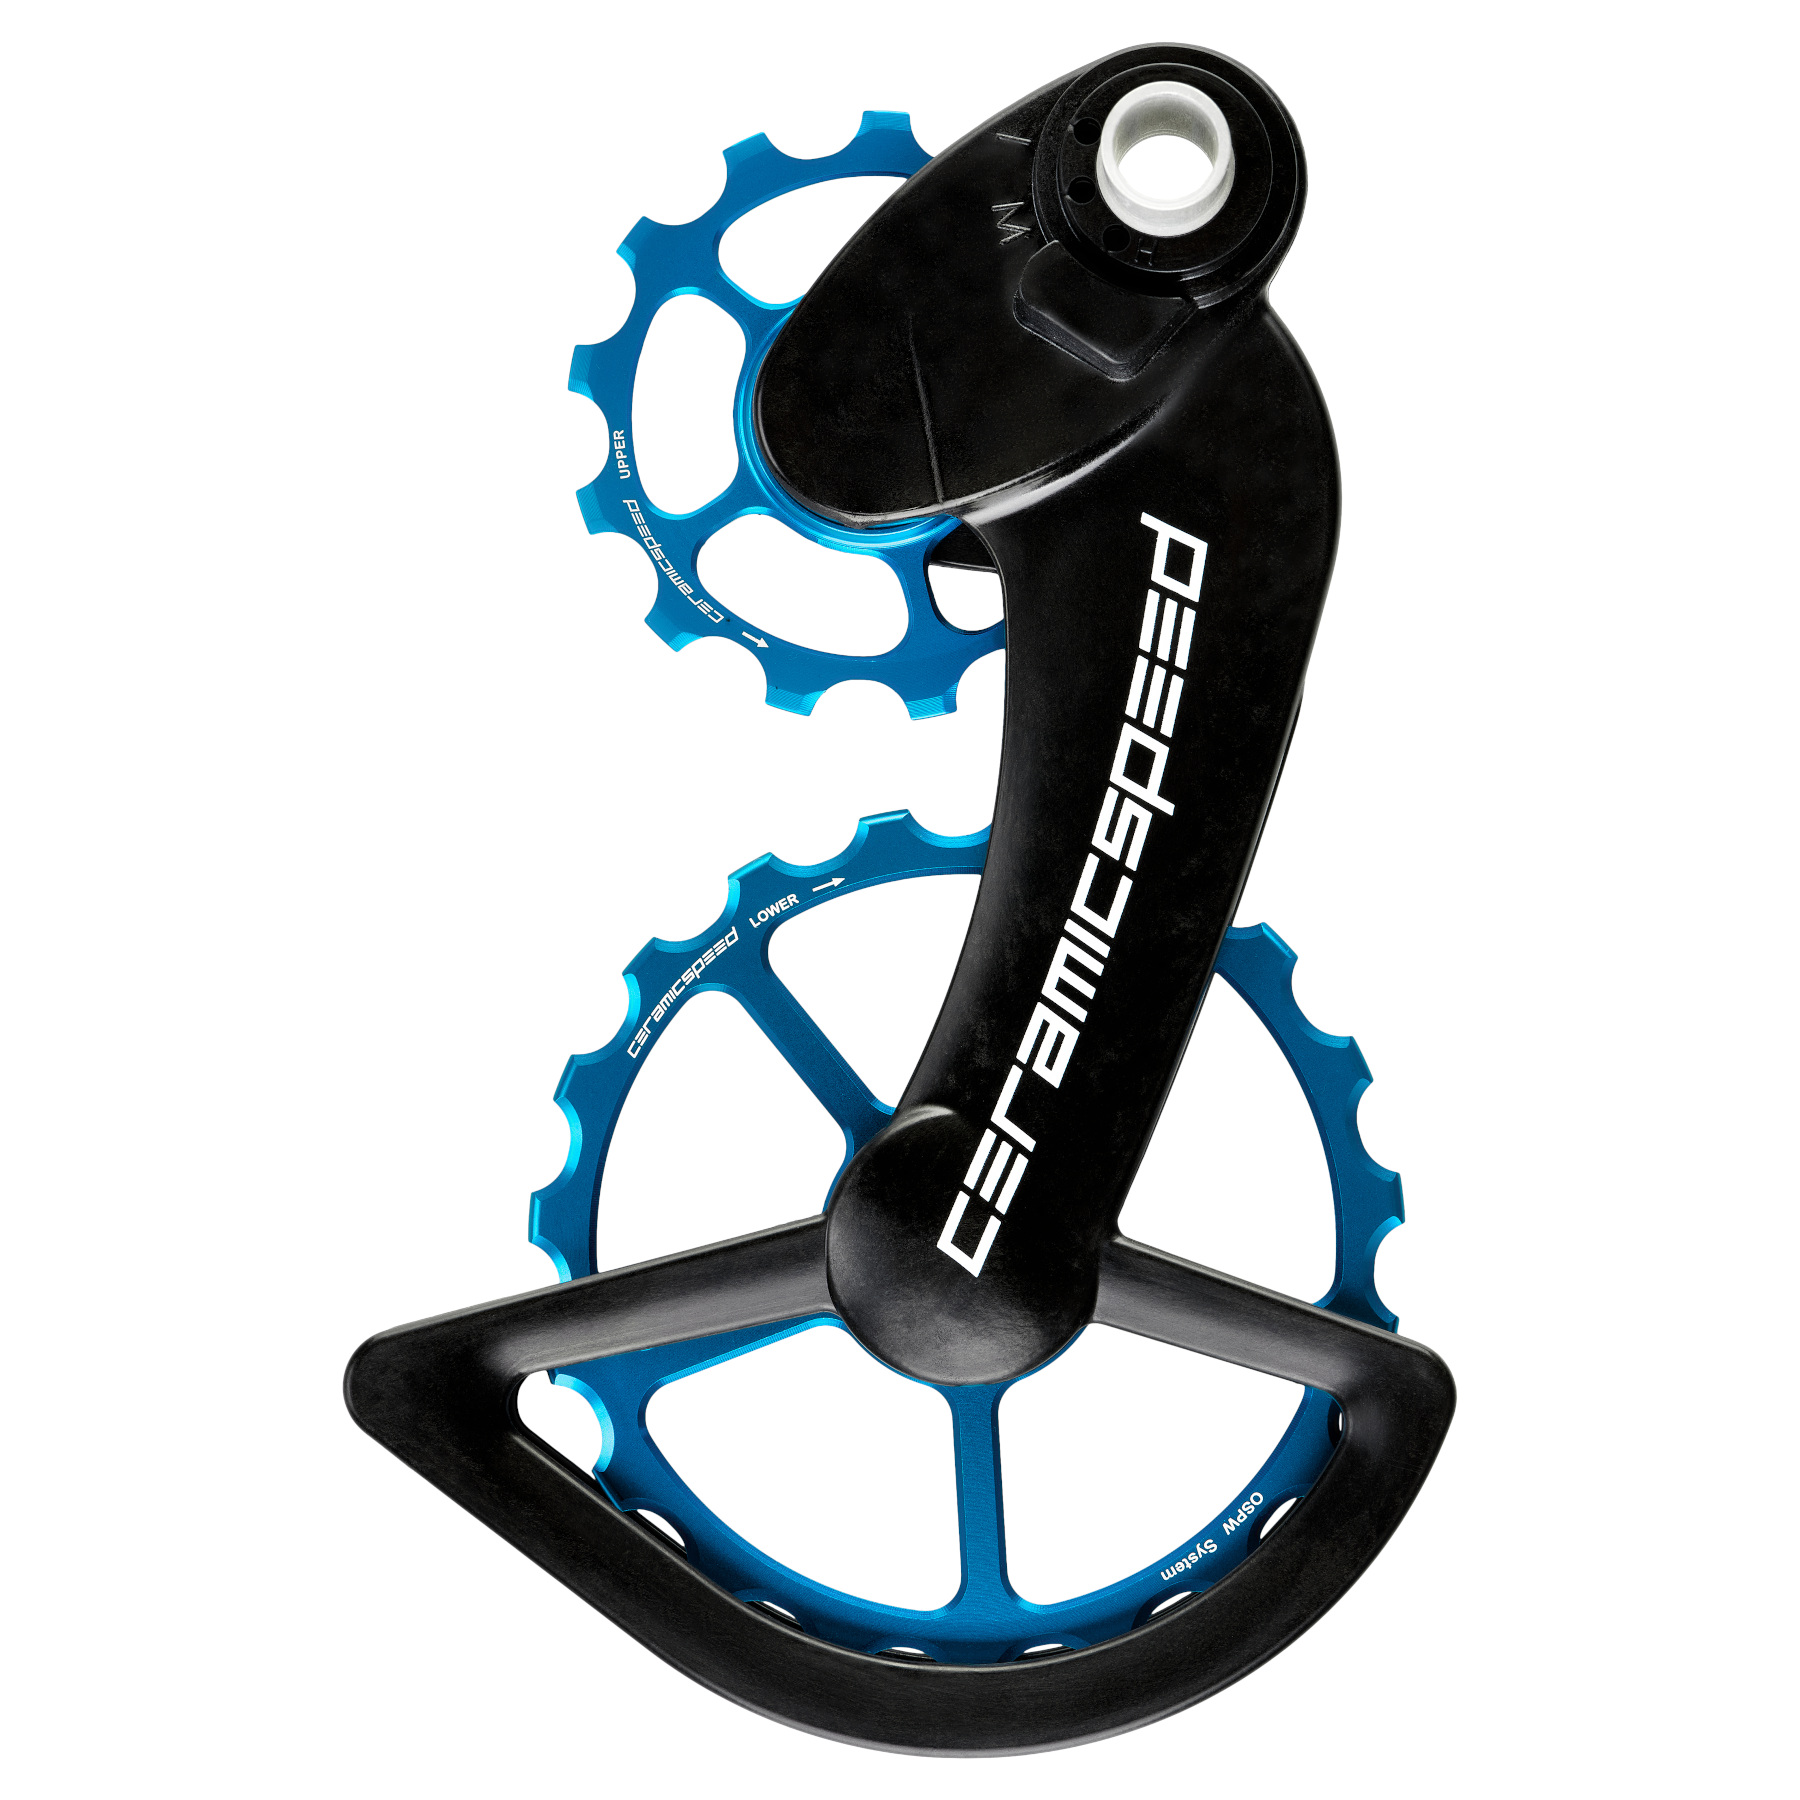 Image of CeramicSpeed OSPW Derailleur Pulley System - for Campagnolo EPS 12s | 13/19 Teeth - blue